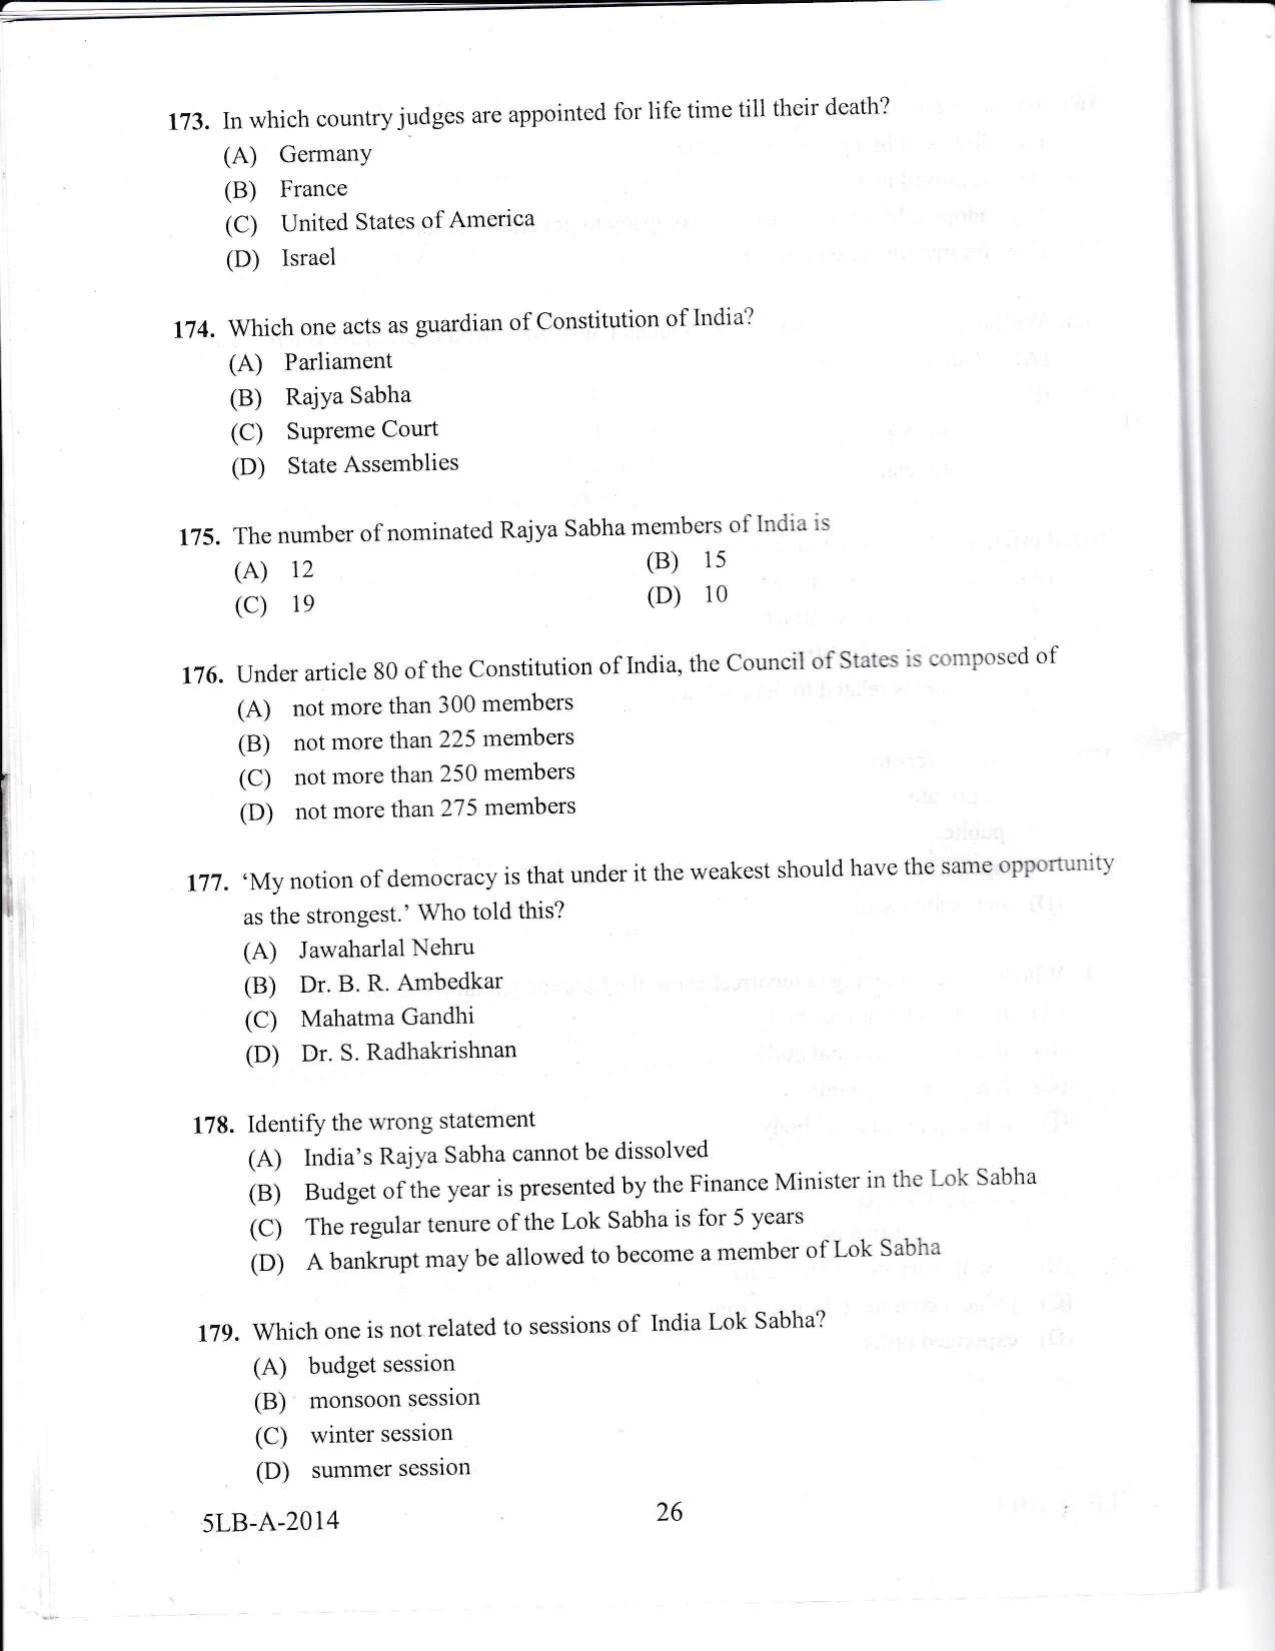 KLEE 5 Year LLB Exam 2014 Question Paper - Page 26